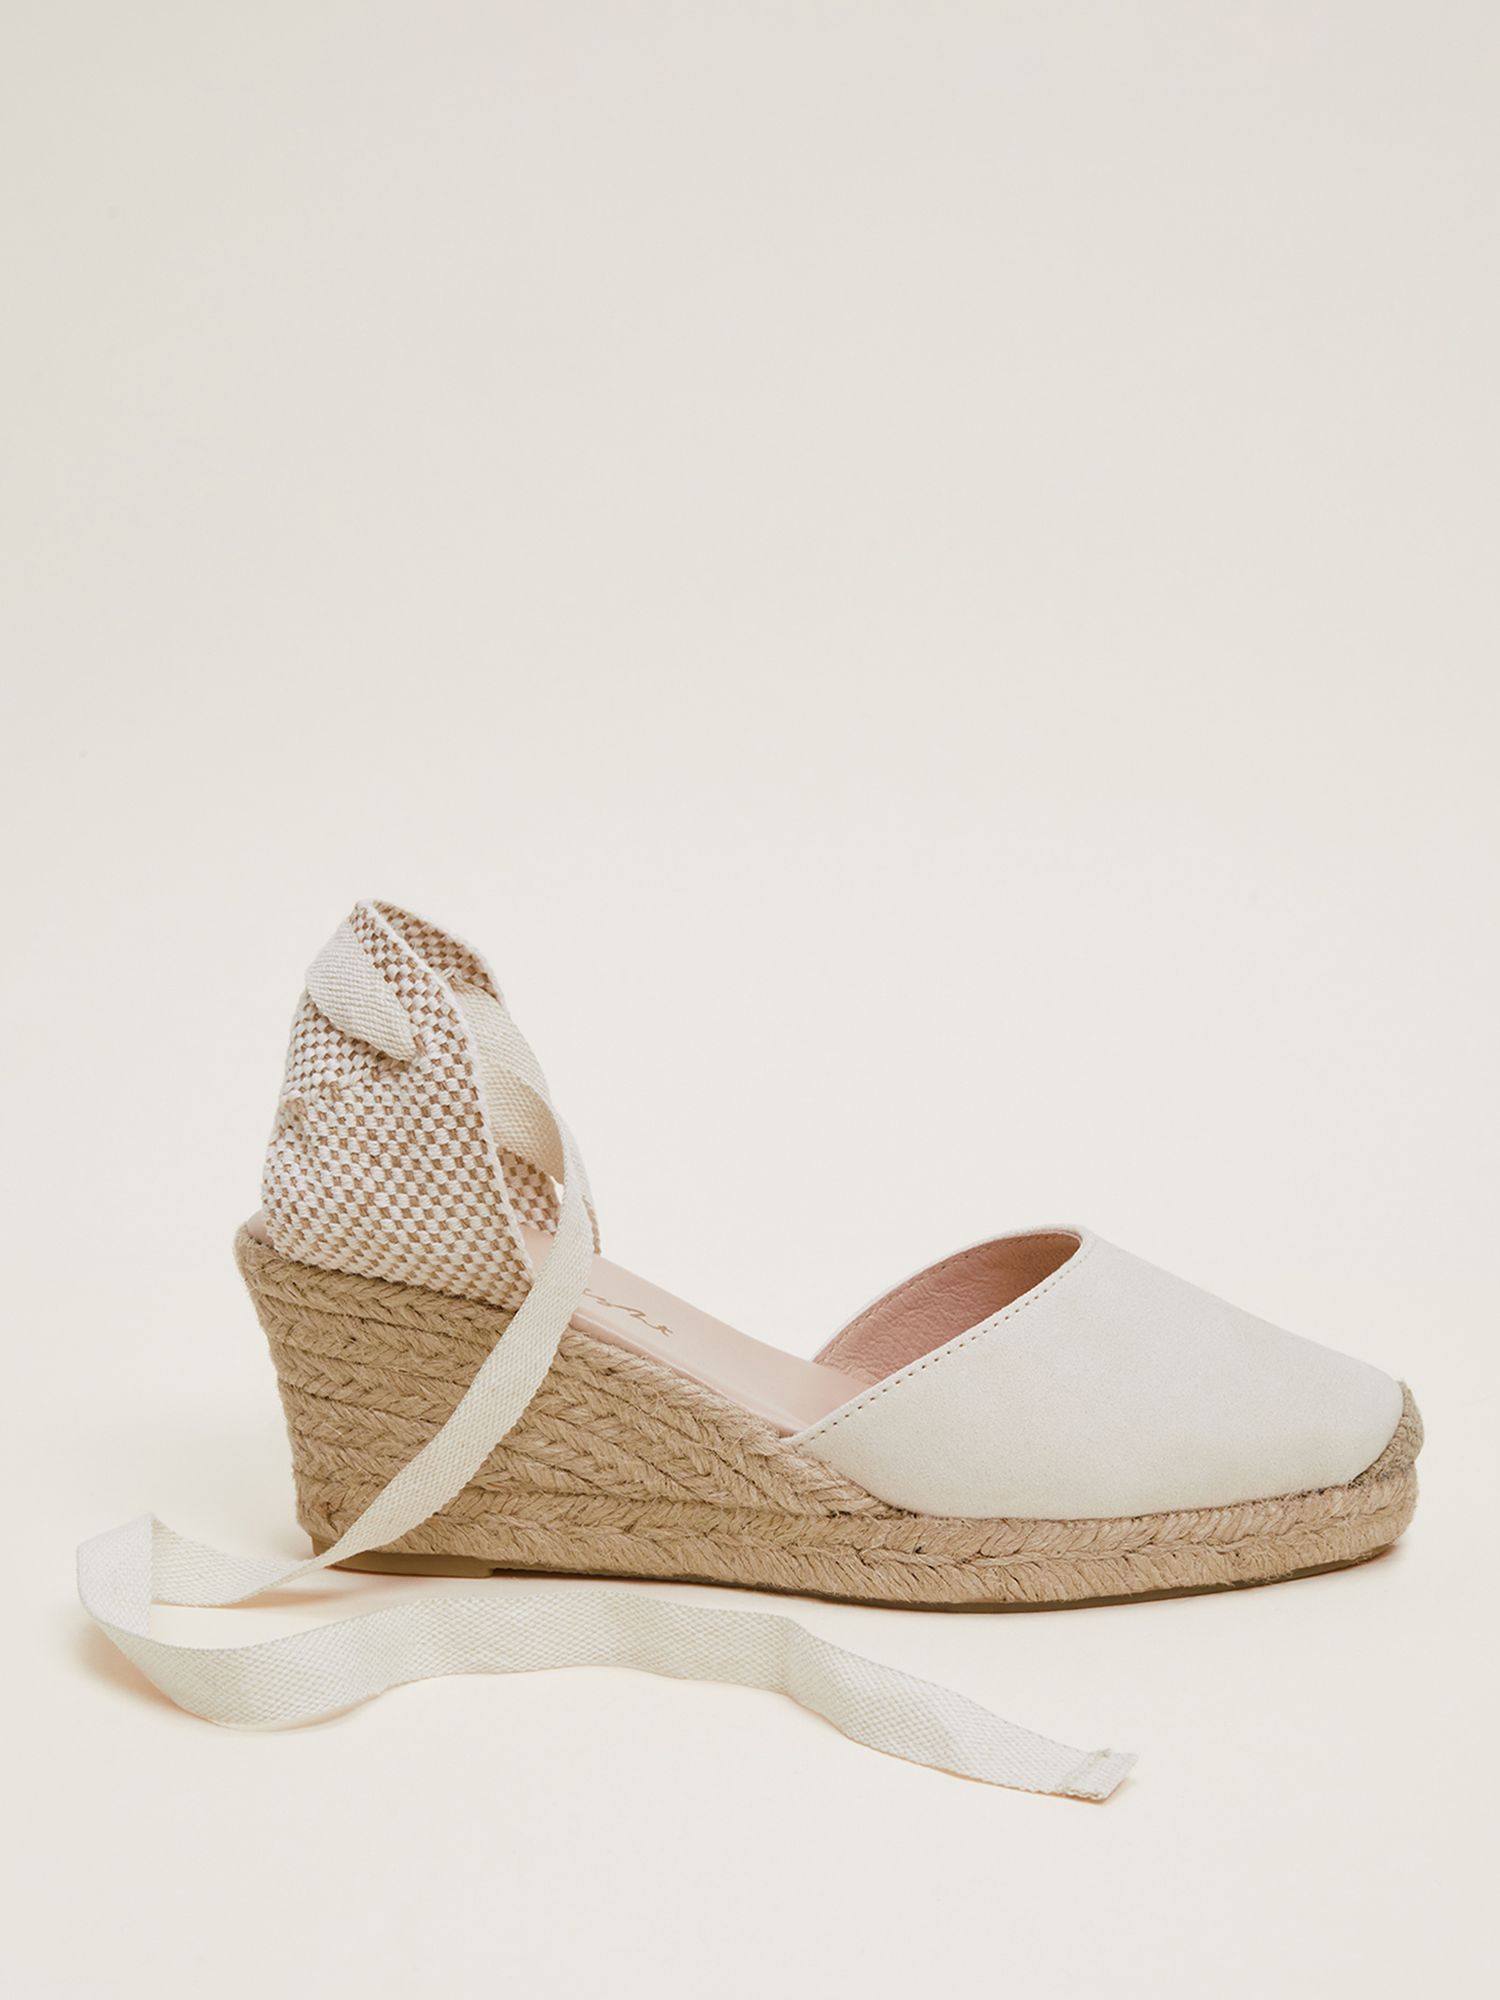 Buy Phase Eight Suede Ankle Tie Espadrilles Online at johnlewis.com